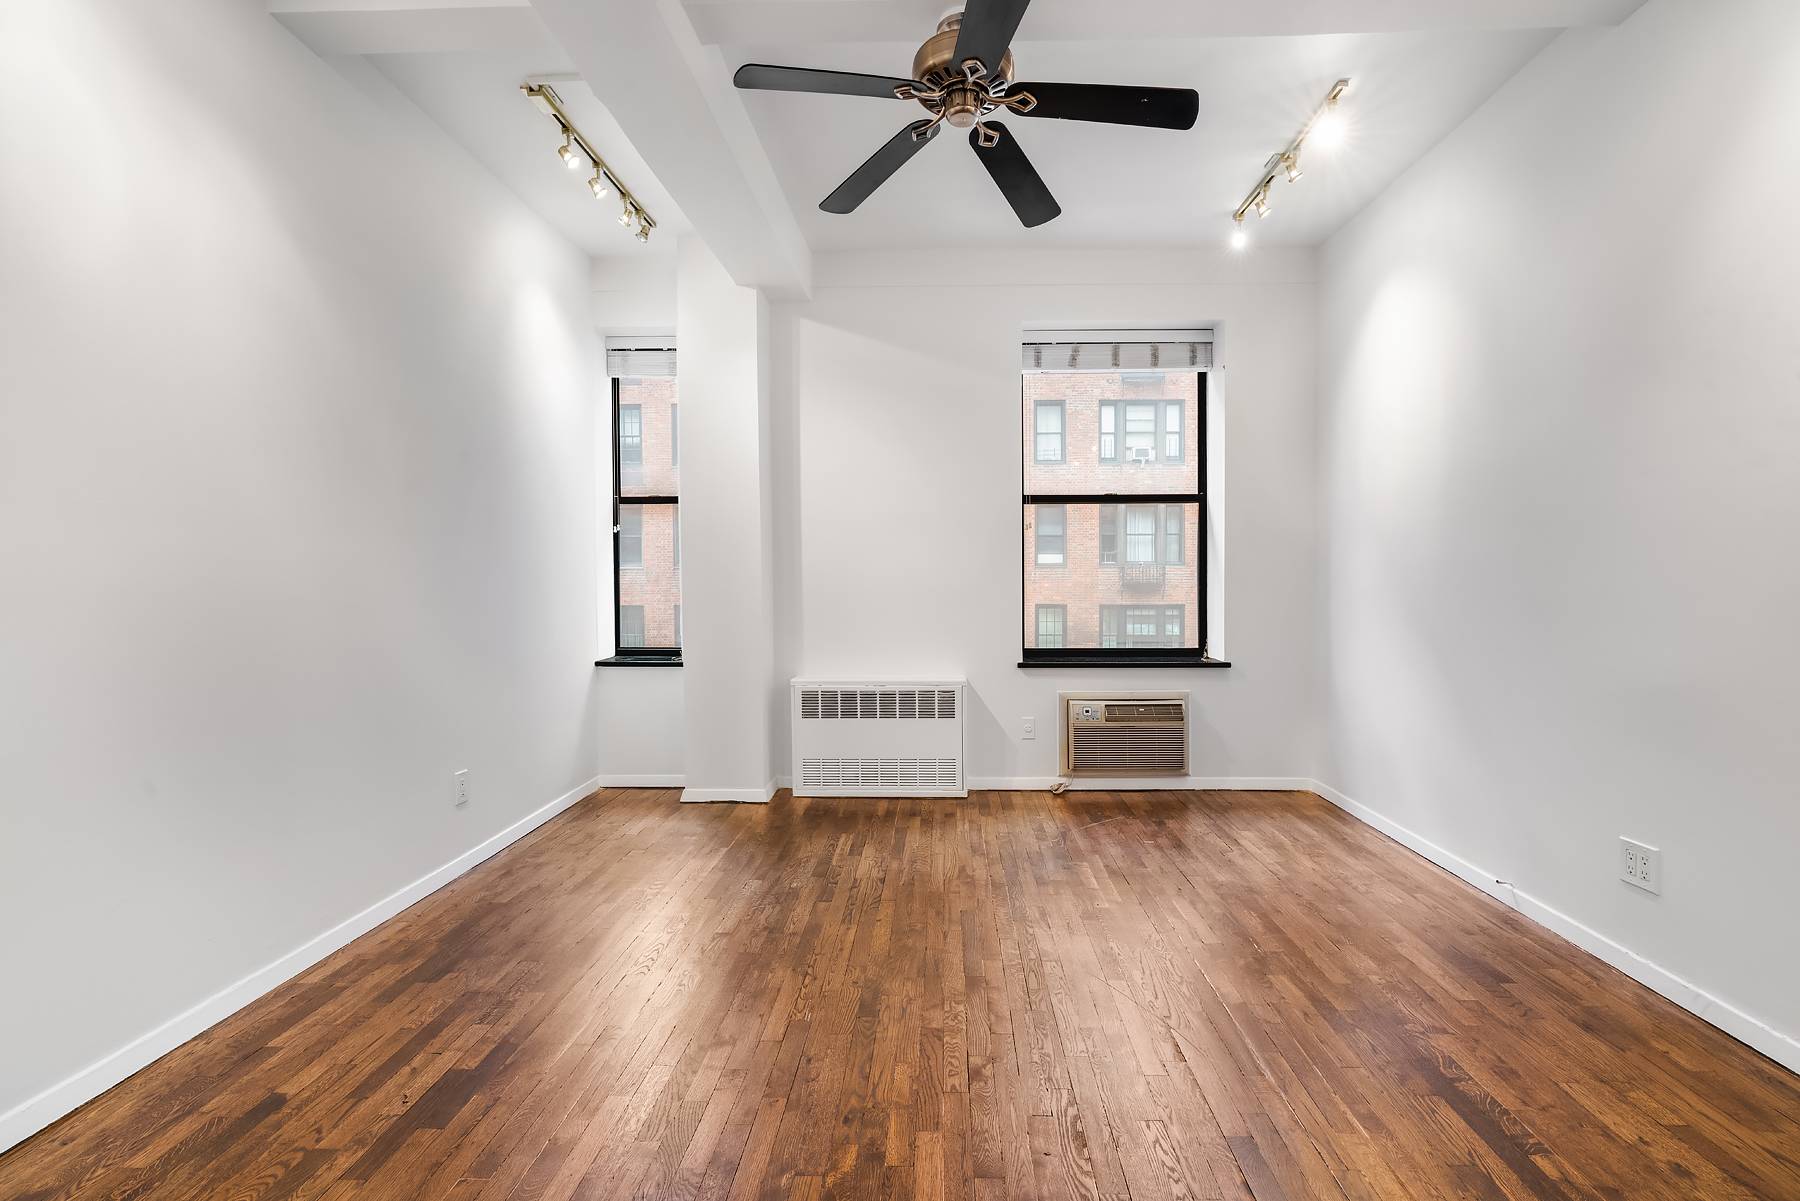 NO FEE ! Sunny and spacious, this charming renovated 1BR apartment at The Albert is one of the best deals in Greenwich Village.